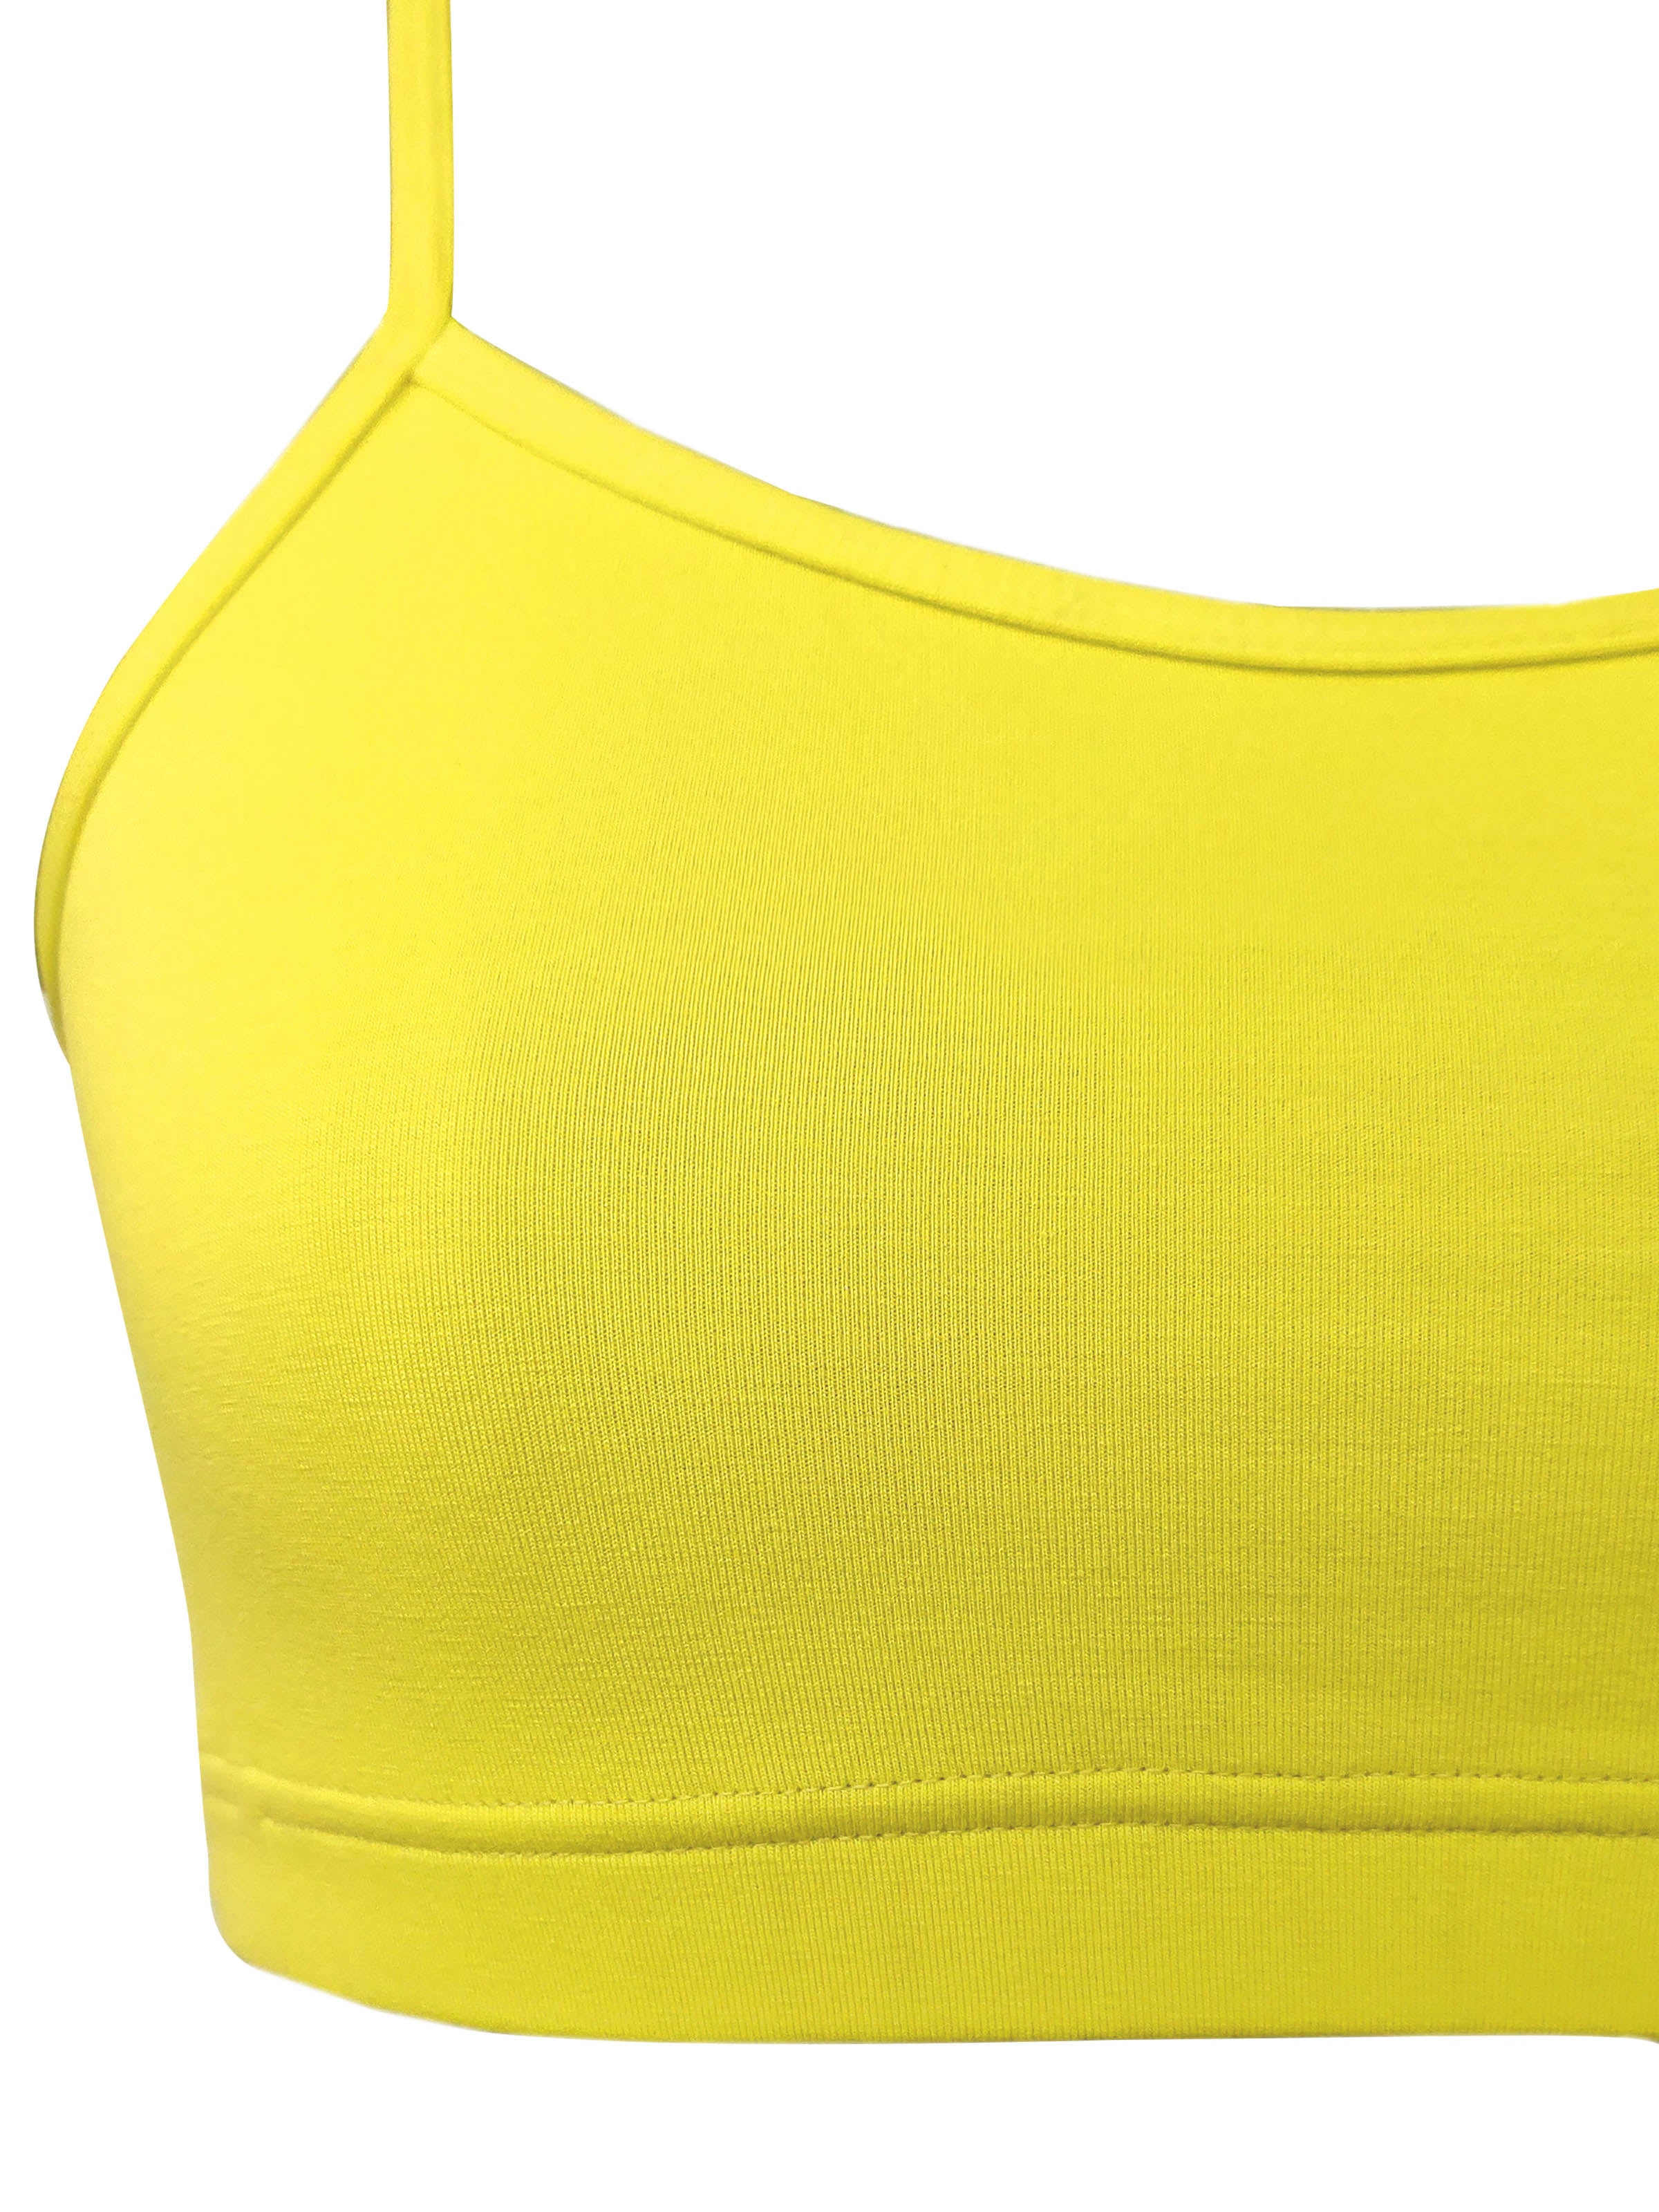 Double-layer Thin Strap Cotton Athletic Bras